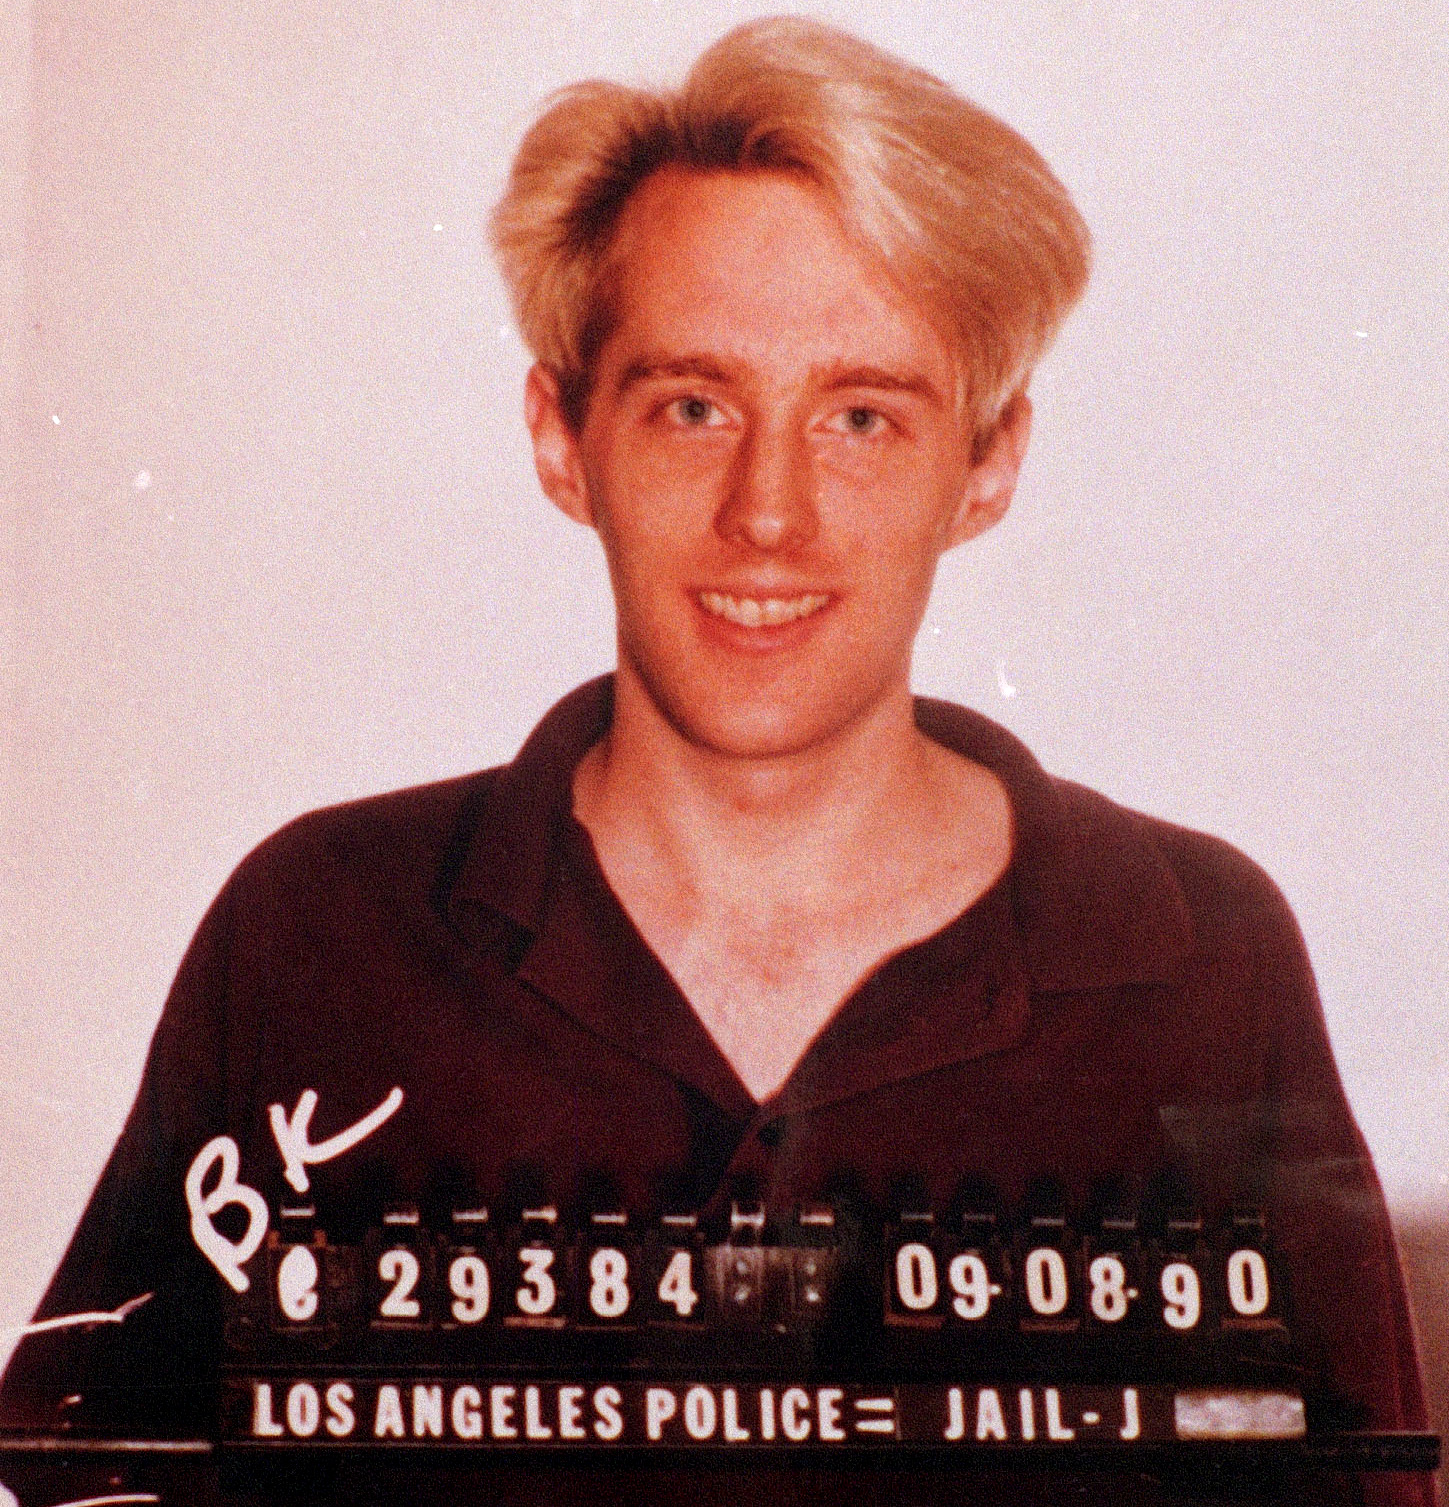 A 1990 police booking photo of Kevin Poulsen, who was charged with espionage for hacking into FBI and national security computer systems. (AP Photo)